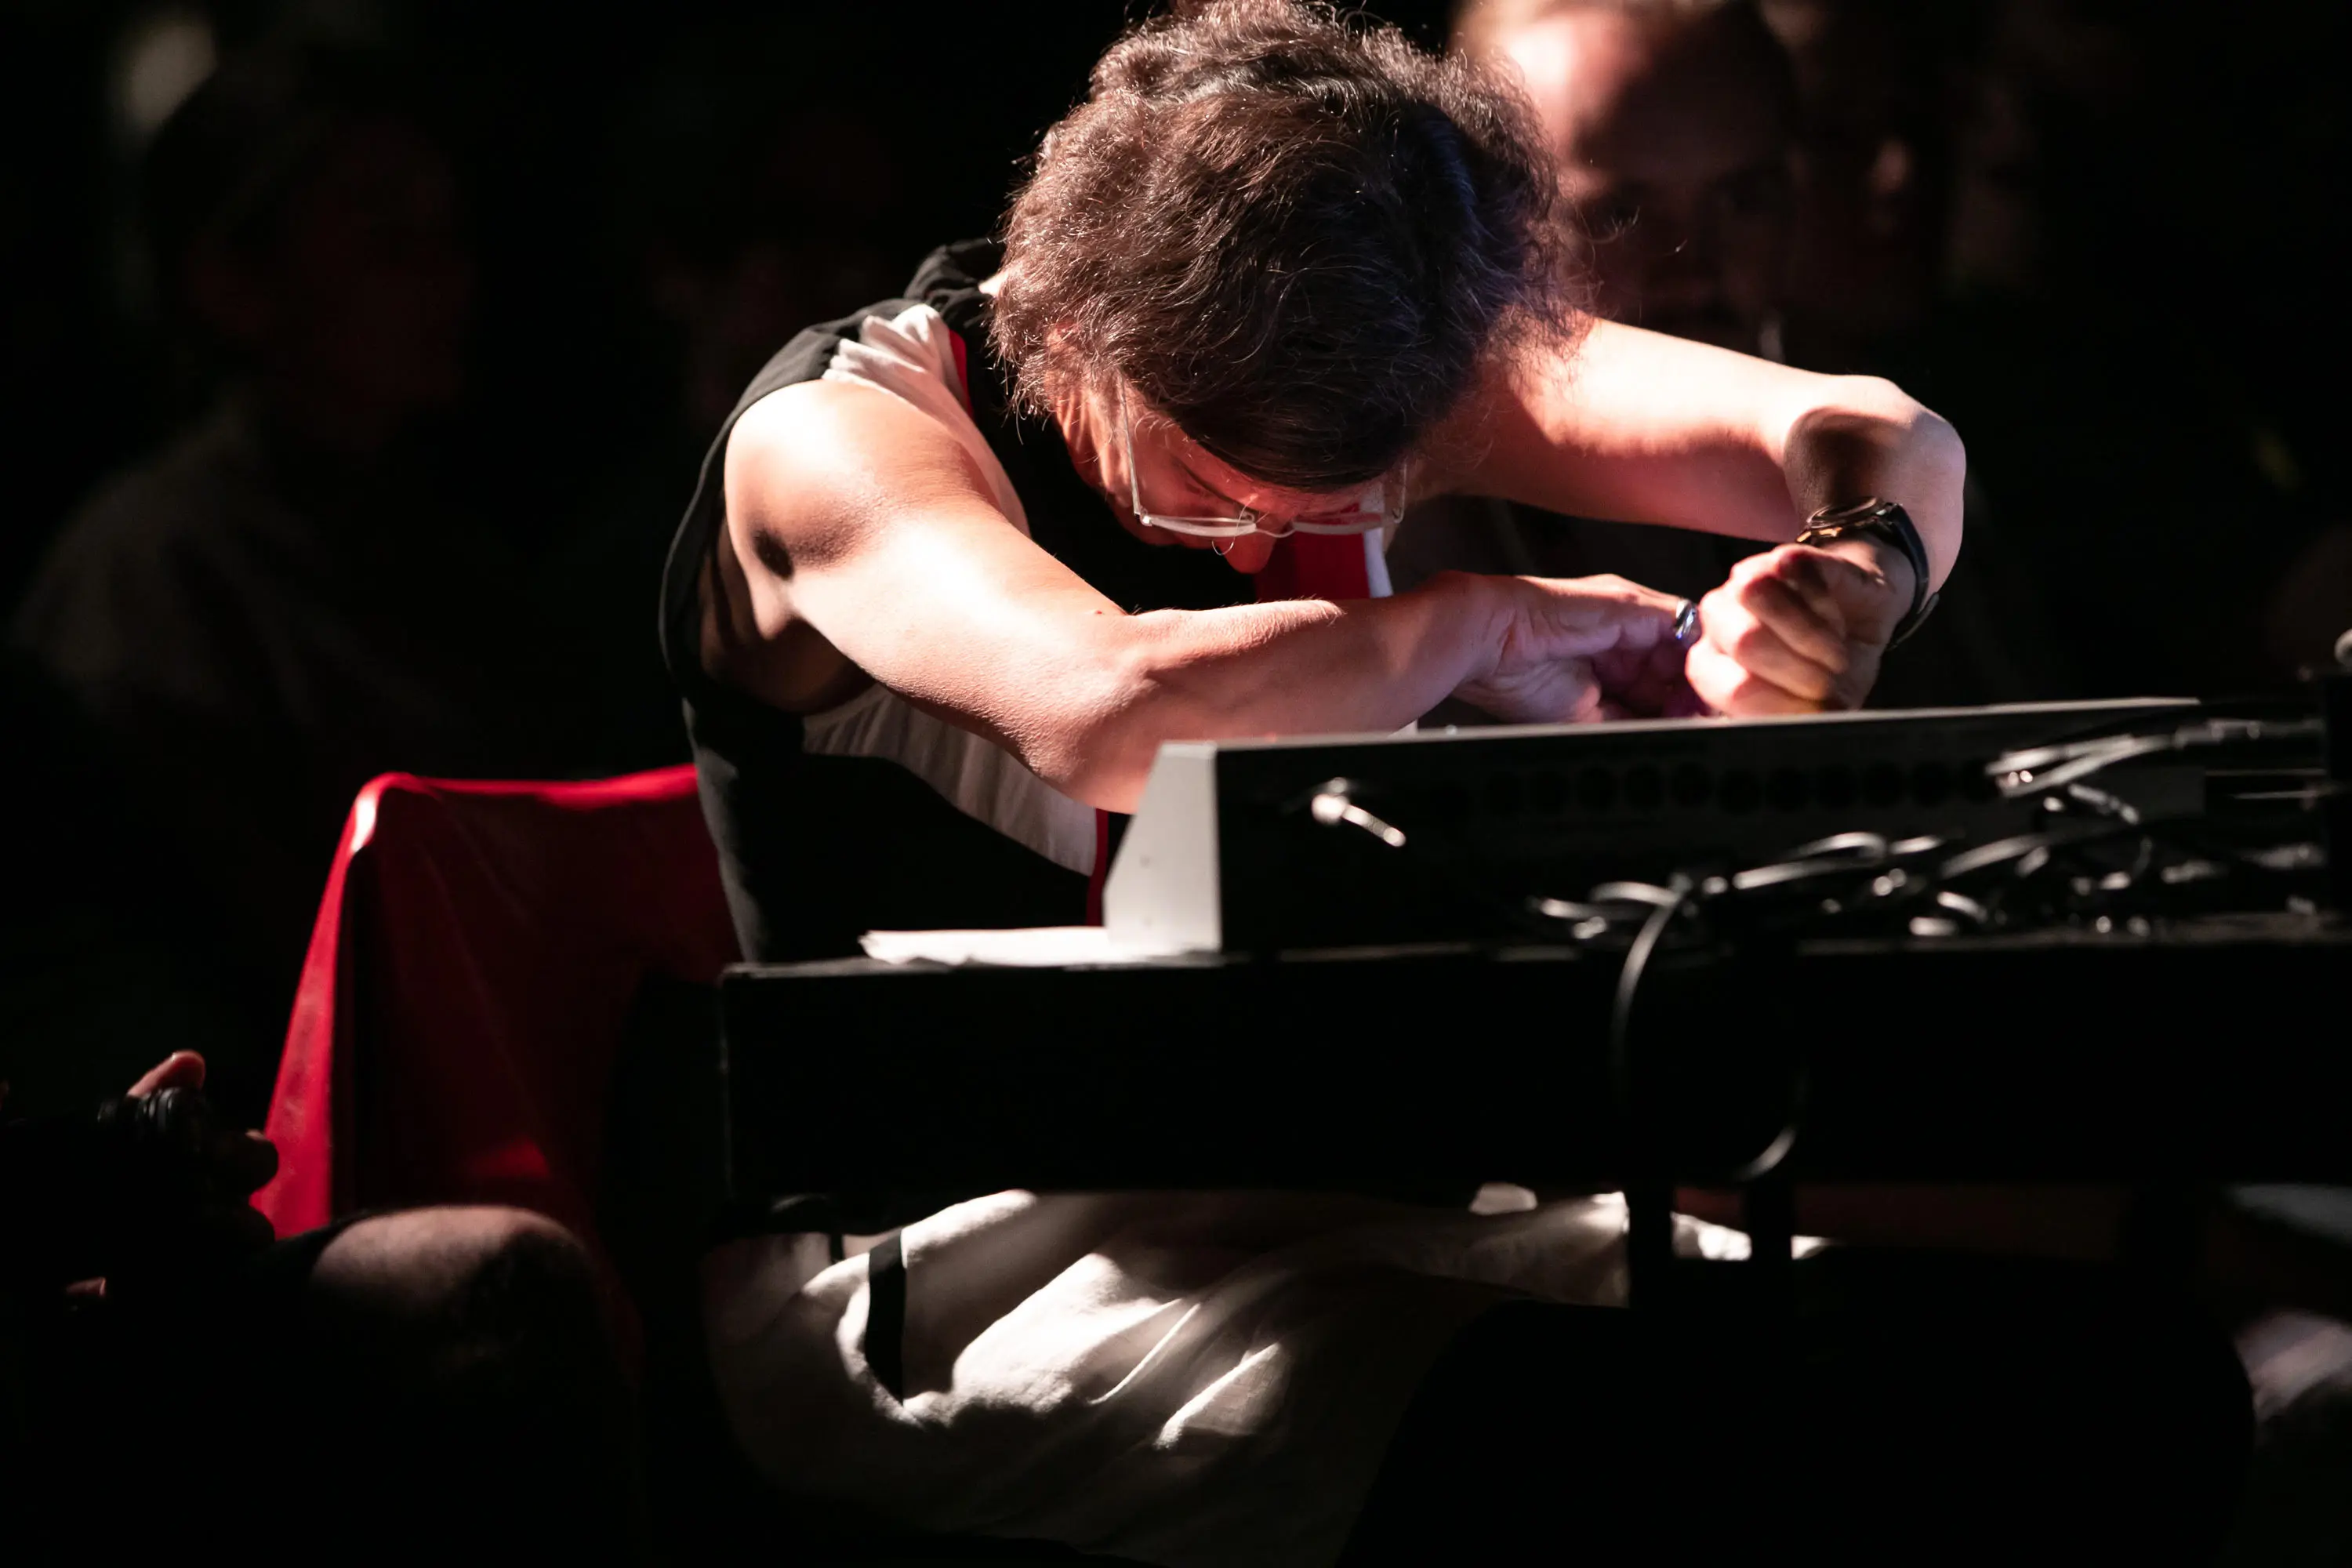 Photo of Schimana, face down, with hands crossed over a mixing console, looking concentrated.